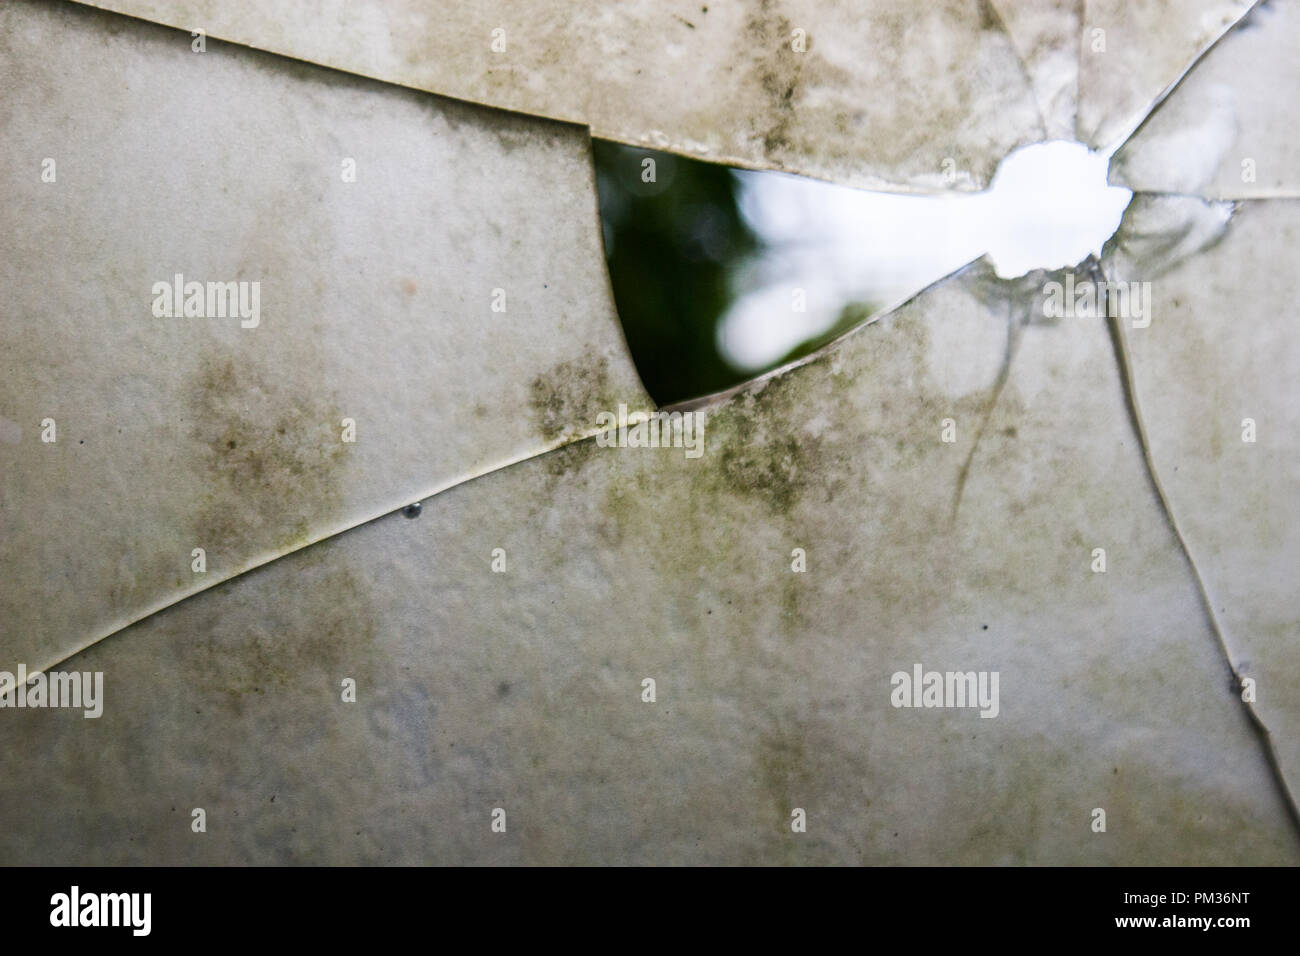 Wallpaper Background Of Broken White Glass With A Hole From Where The Nature Of The Landscape Can Be Seen No People Stock Photo Alamy